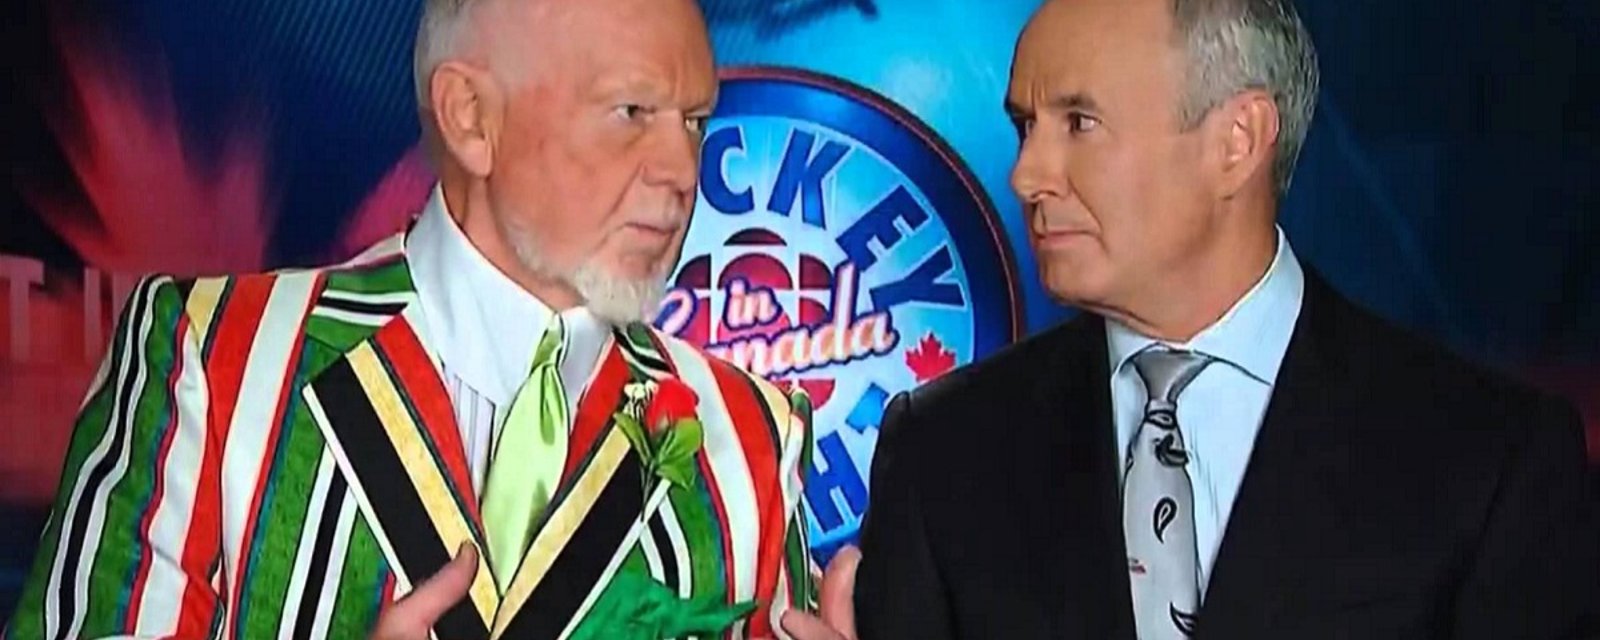 NHL Legend Don Cherry shares his own thoughts on players who sit for the anthem.